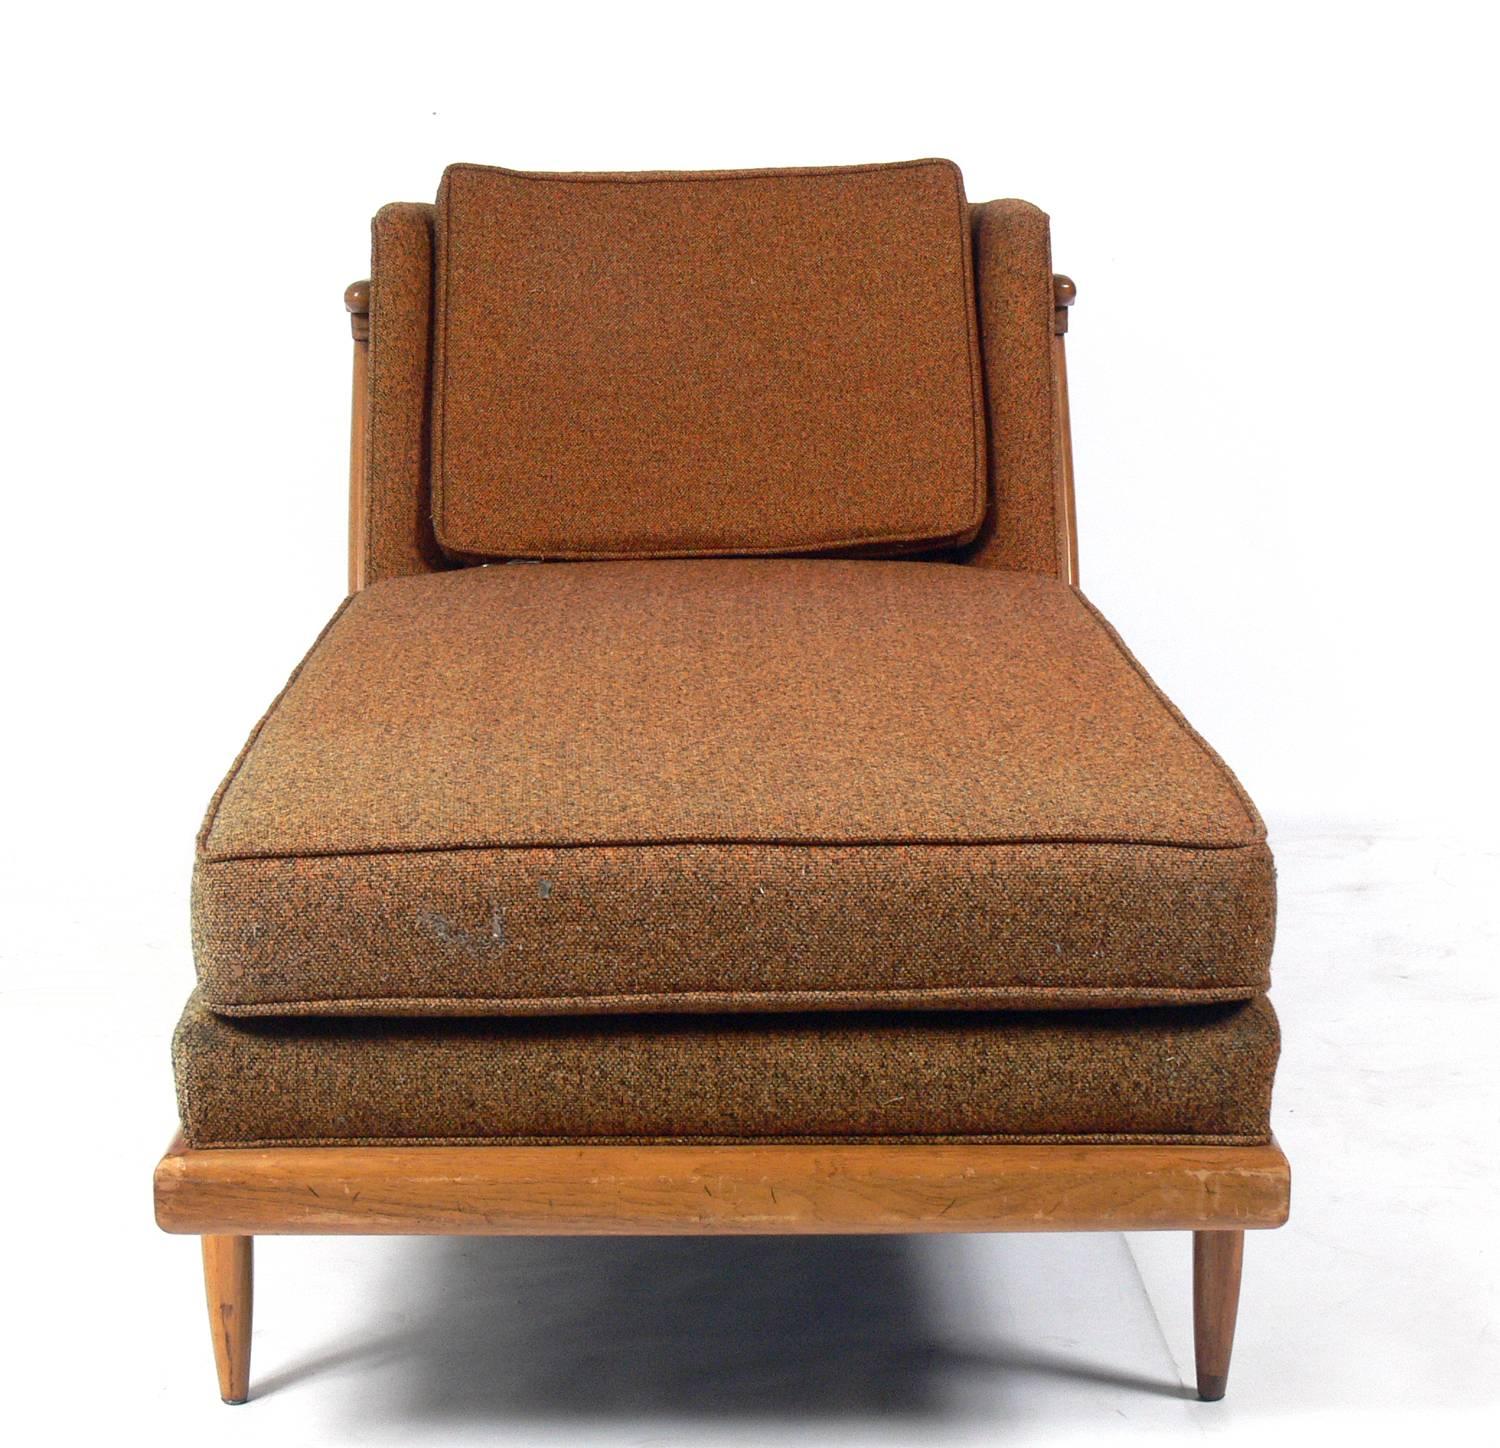 Mid-Century Modern Curvaceous Chaise Lounge Designed by Lubberts and Mulder for Tomlinson